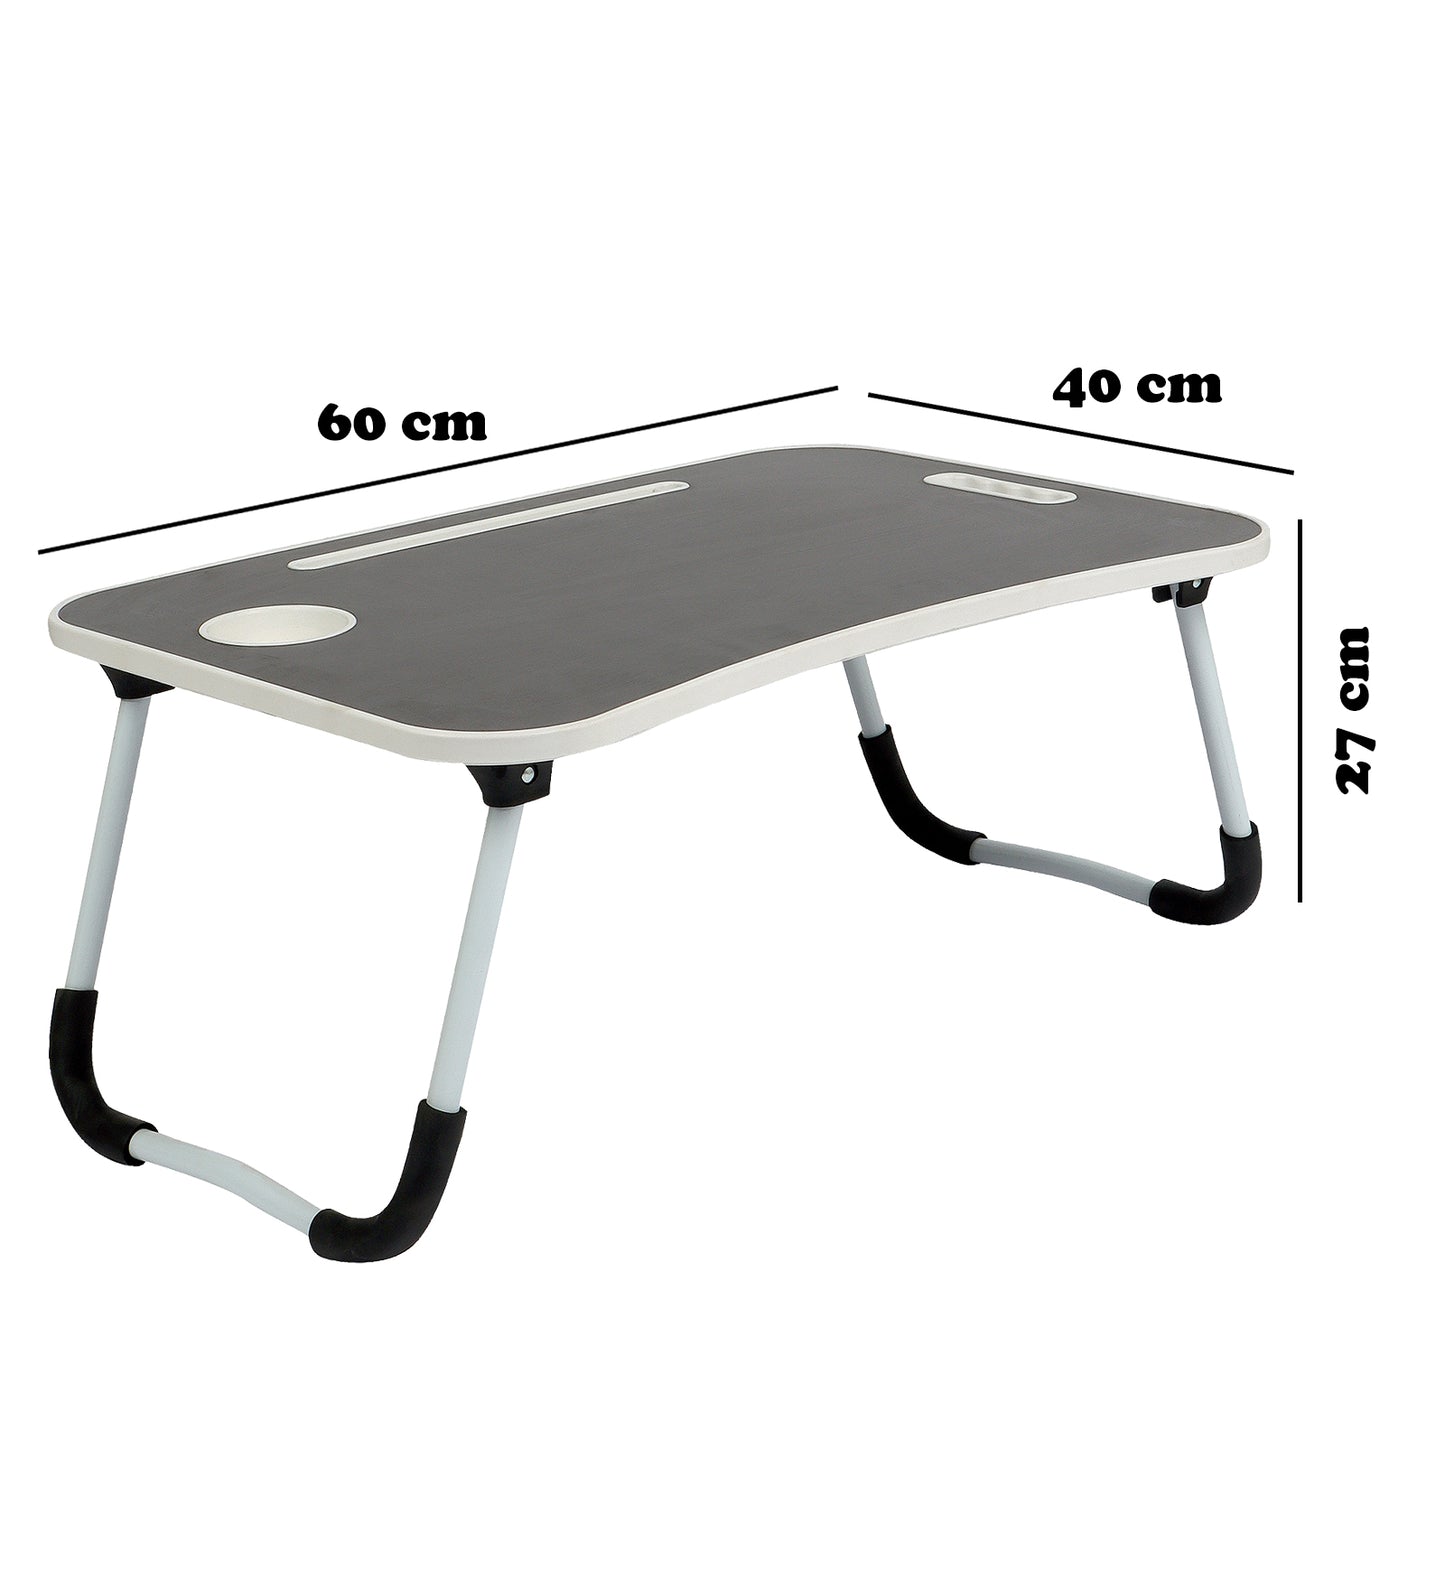 Bed Table Black